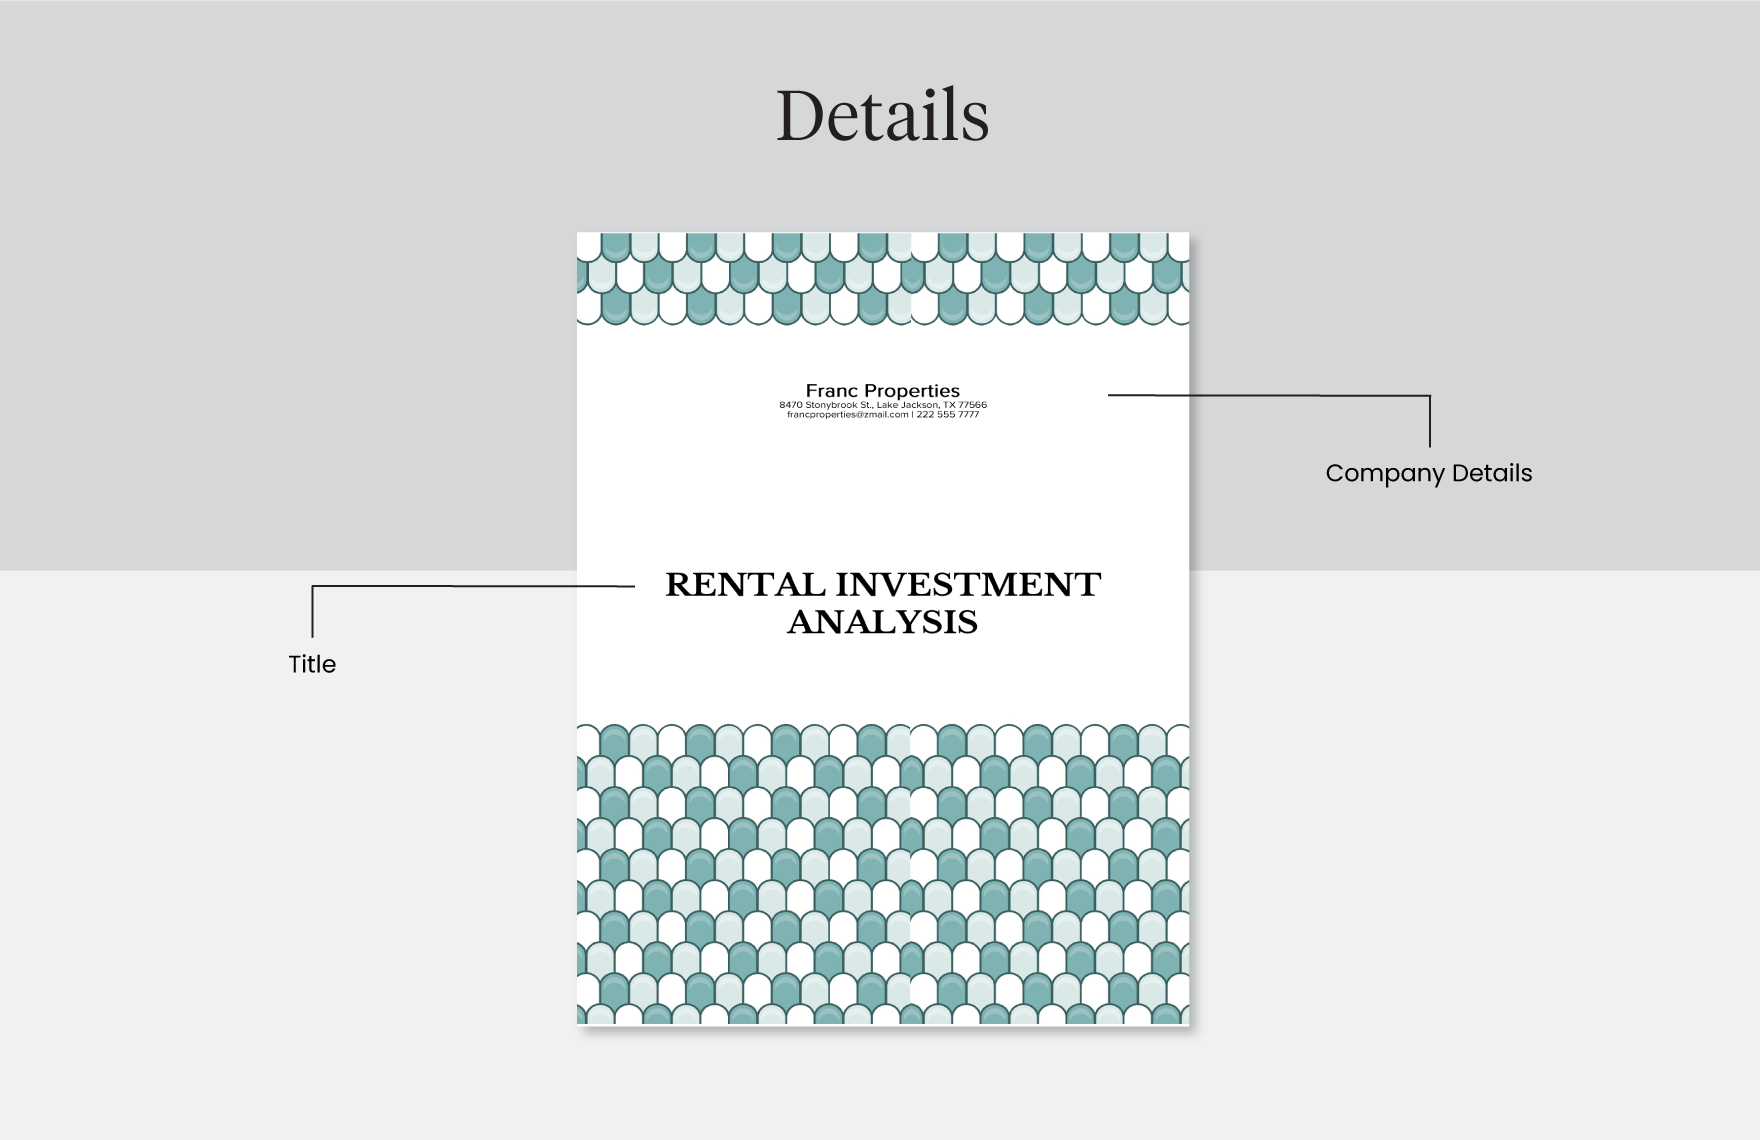 Rental Investment Analysis Template